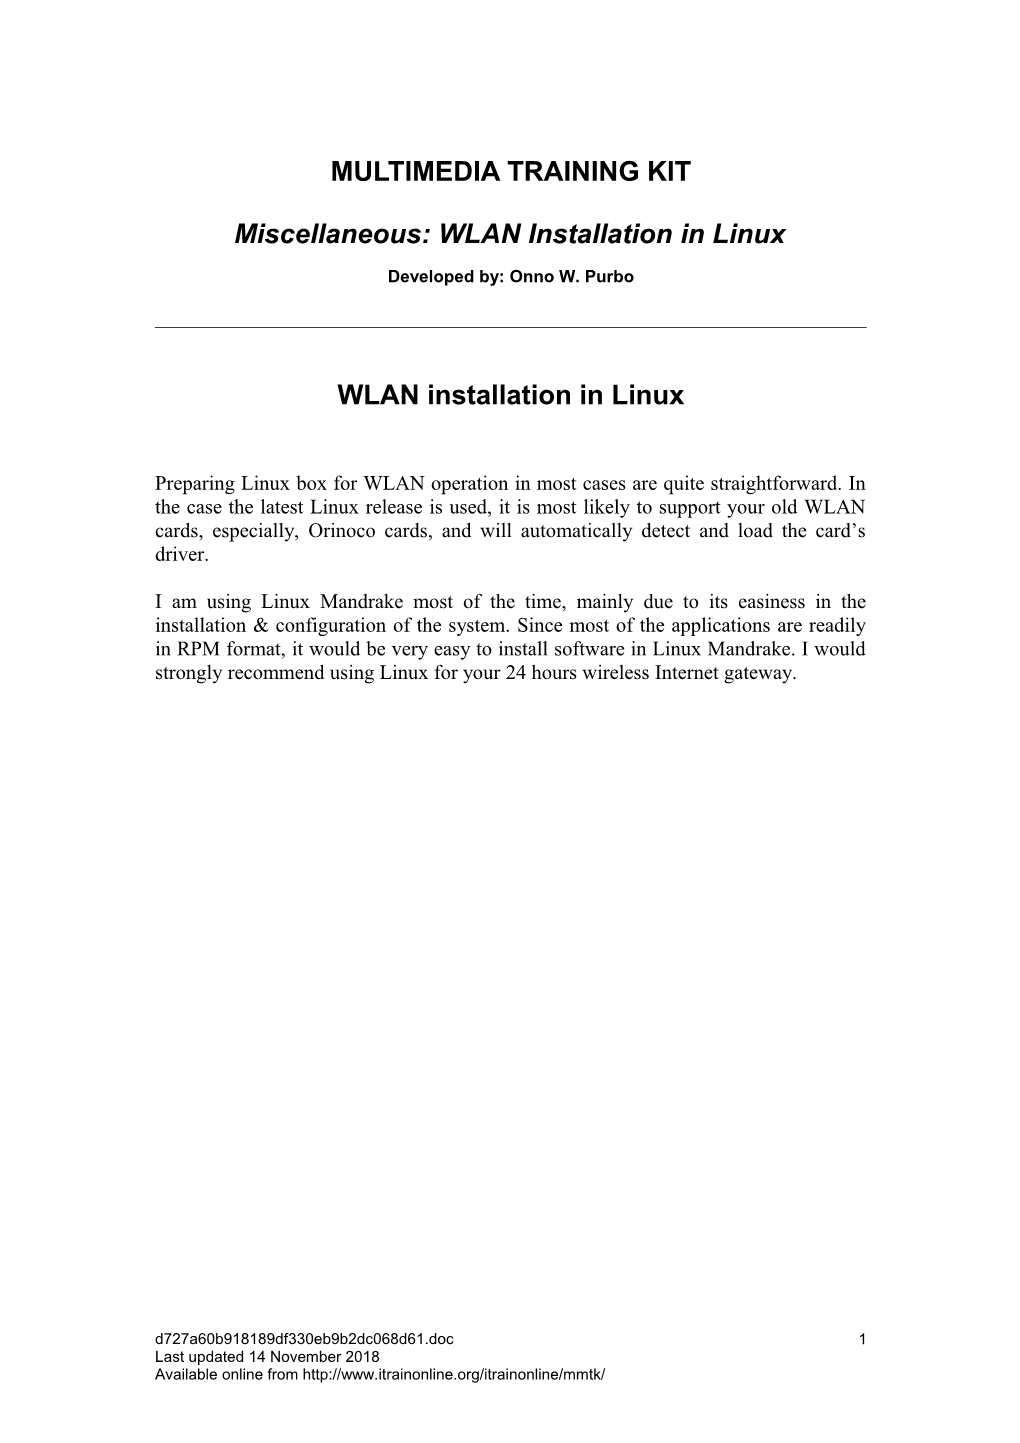 Miscellaneous: WLAN Installation in Linux